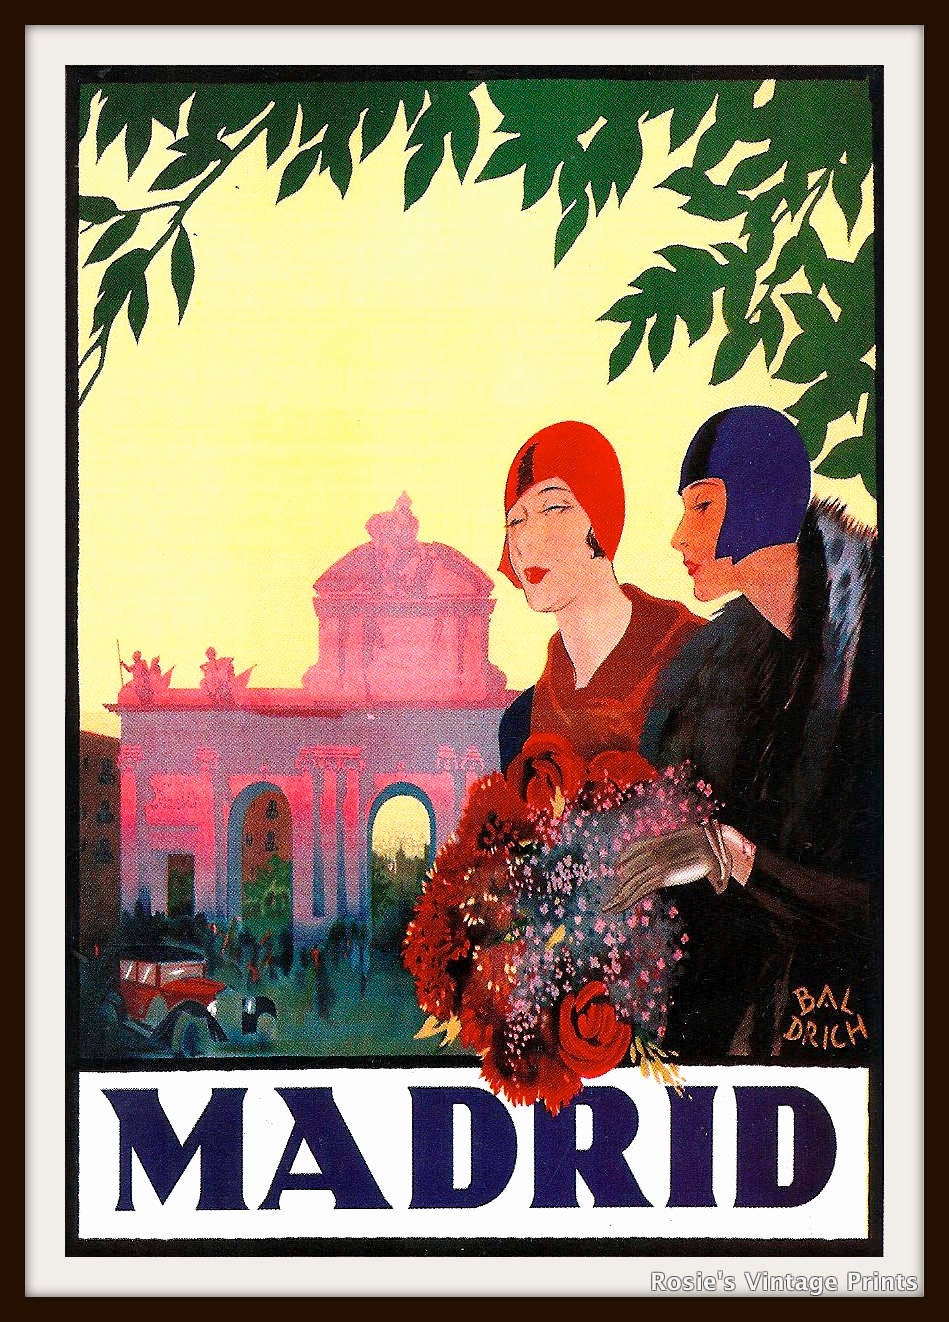 Vintage Travel Poster of Madrid circa 1925 with Flappers - Giclee Re-Print - RosiesVintagePrints